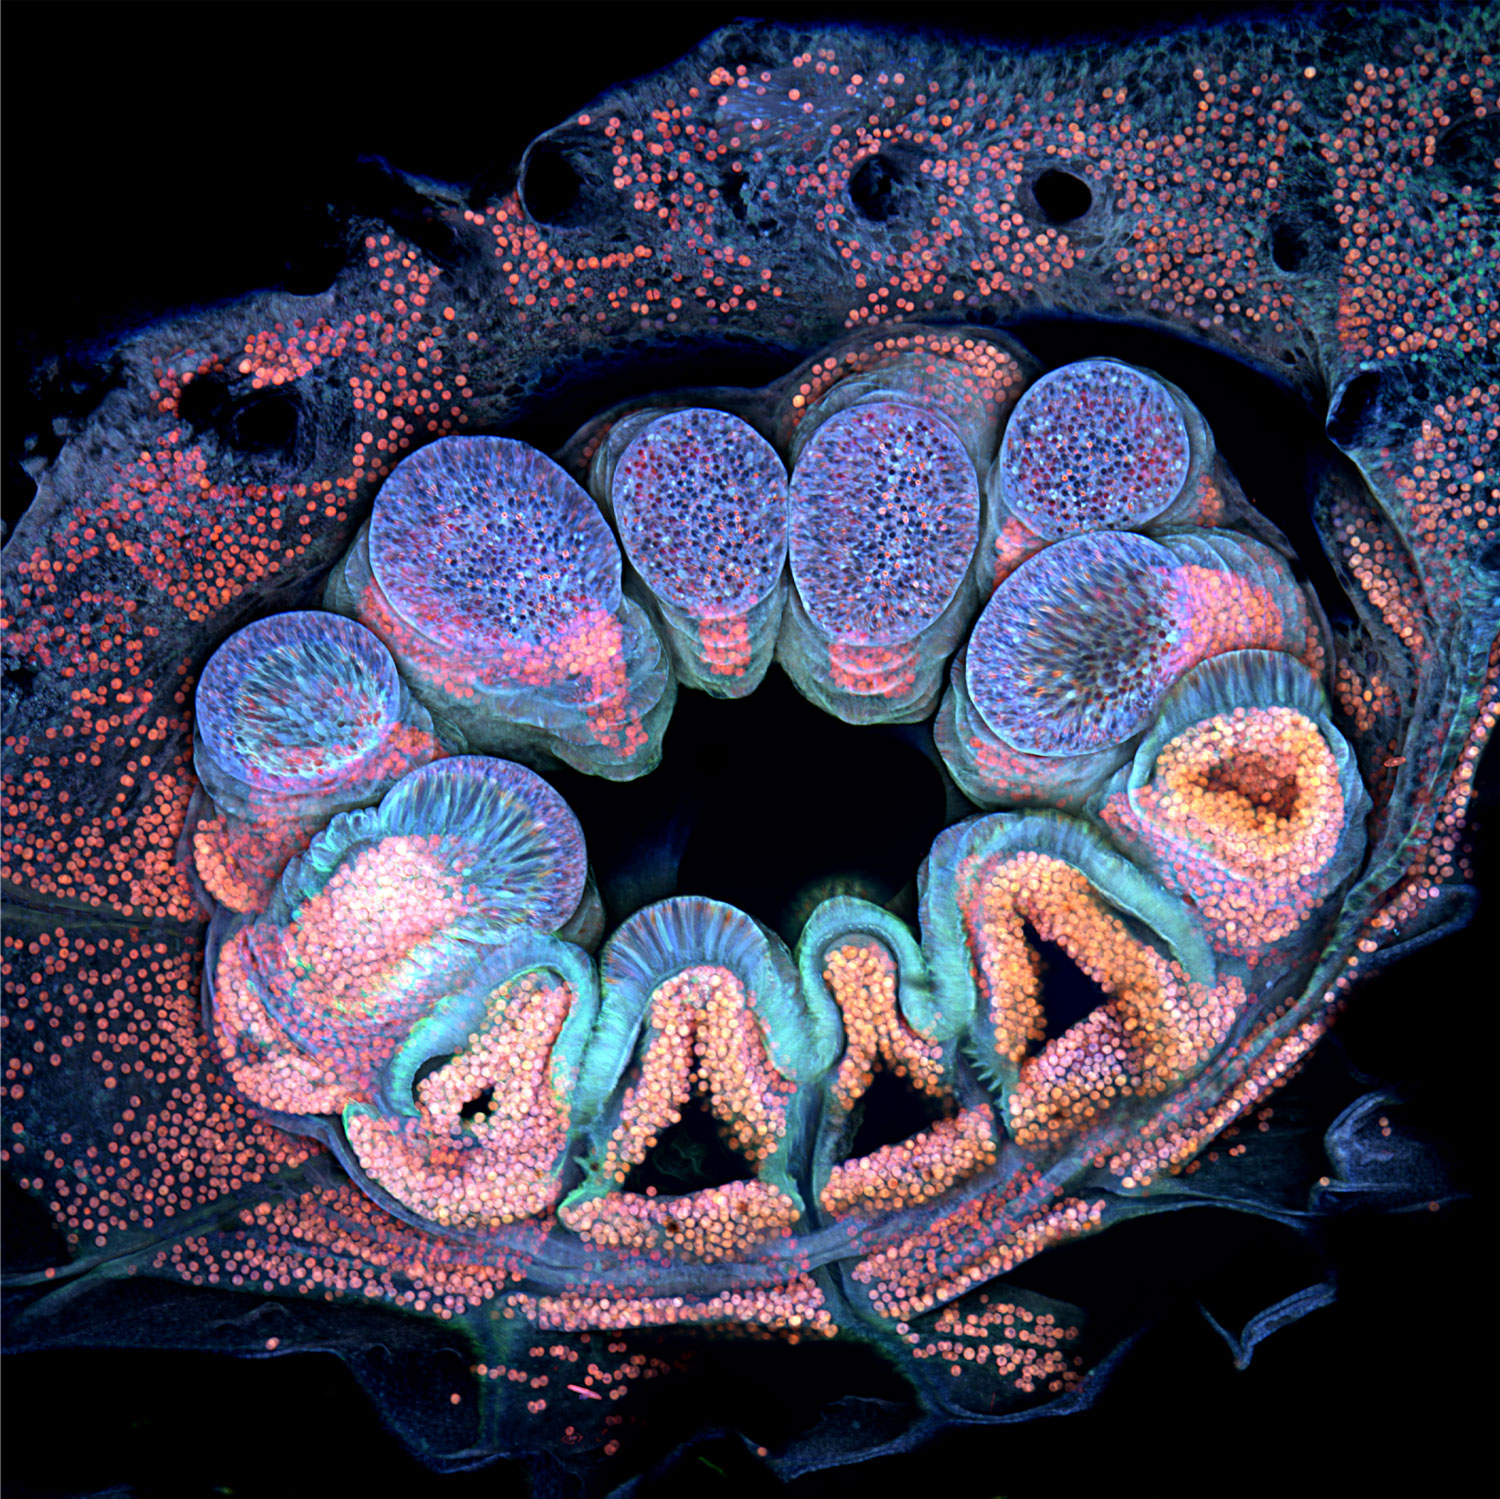 a coral polyp, shown fluorescing in blue, pink and purple, resembling a ring of teeth or similar structures, against a black backdrop